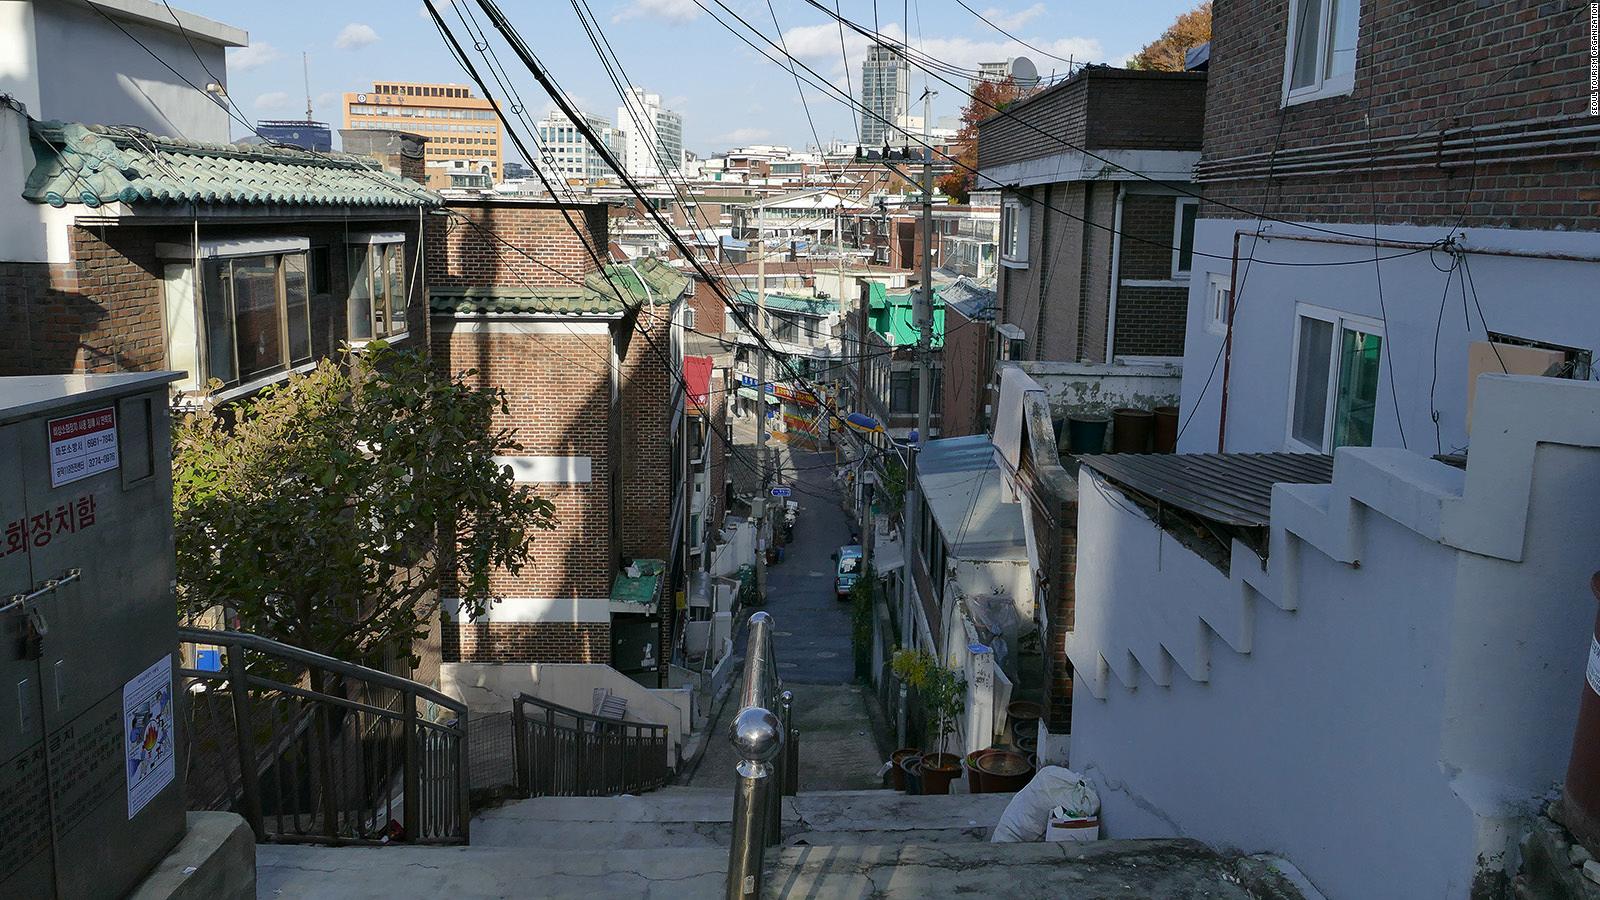 Parasite' filming locations you can visit in Seoul